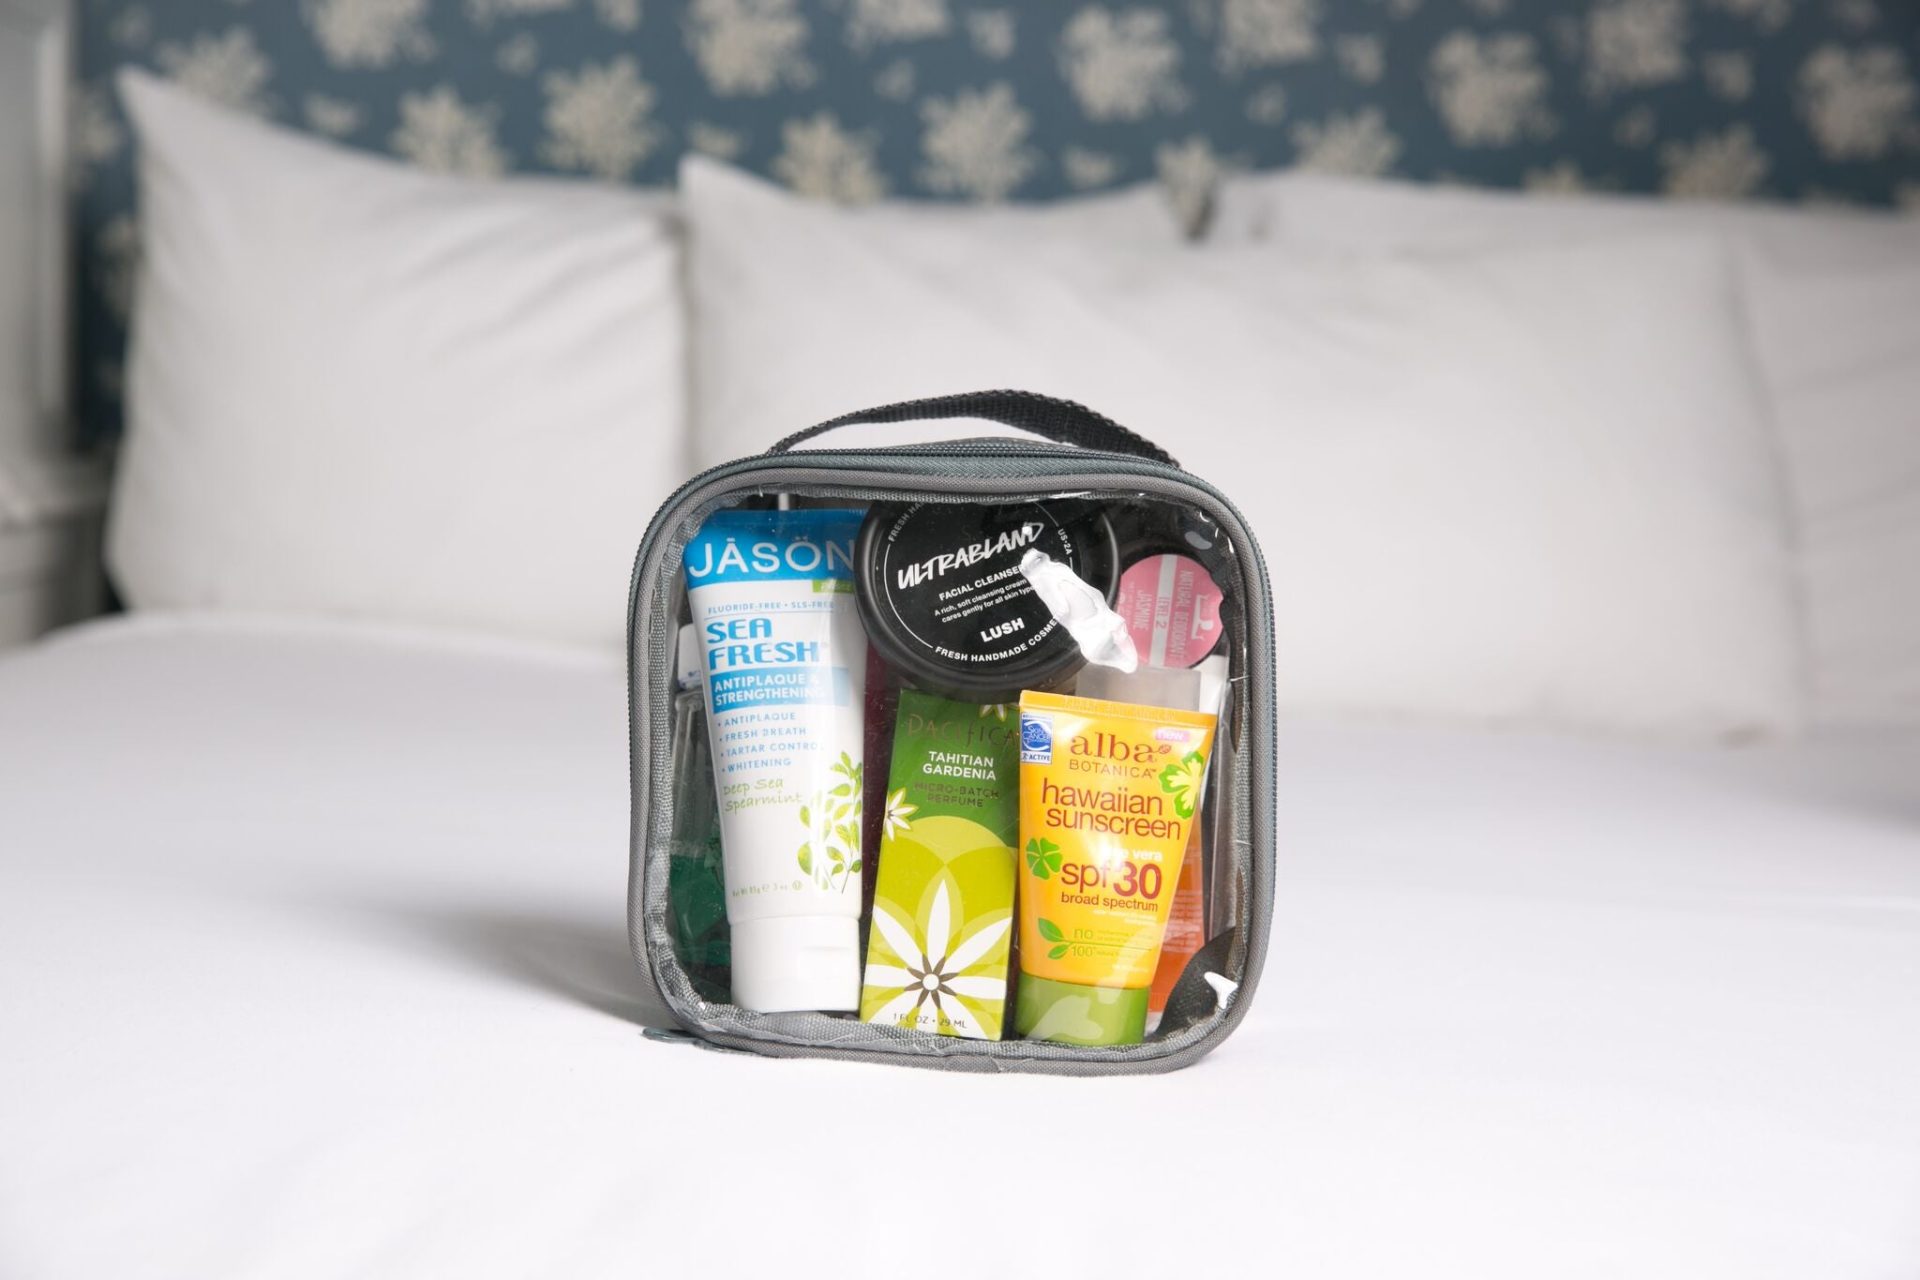 Carry on bag toiletries inside gray packing cube